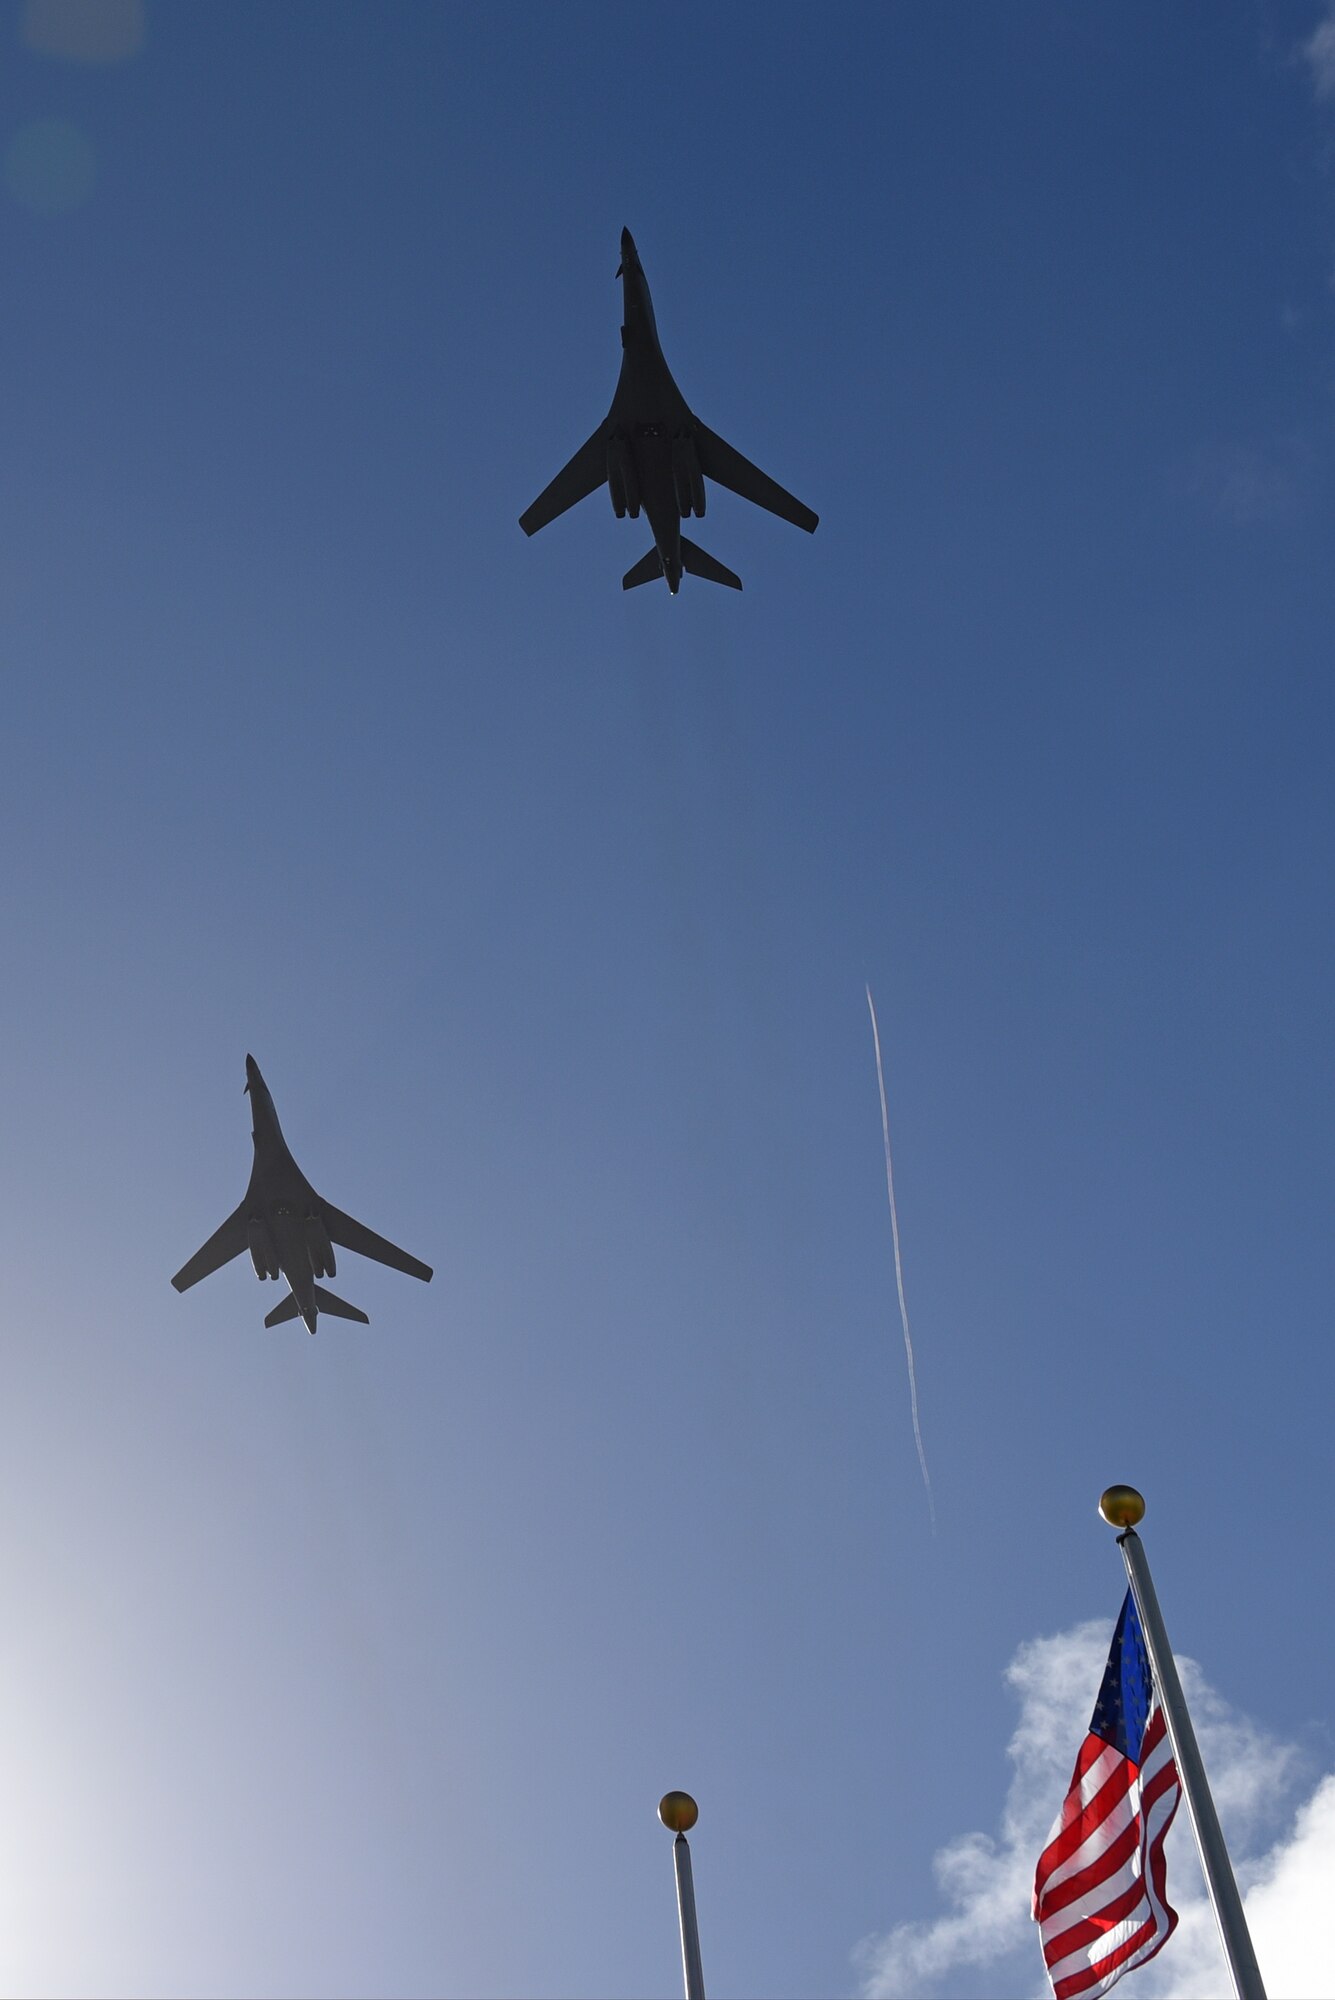 B-1B Lancers perform a flyover to begin the Operation Linebacker II Remembrance Ceremony Dec. 16, 2016, at Andersen Air Force Base, Guam.  A formation of 33 Airmen stood at the ceremony to represent the 33 who lost their lives flying in B-52 Stratofortress bombers during Operation Linebacker II. (U.S. Air Force photo/Airman 1st Class Jacob Skovo)